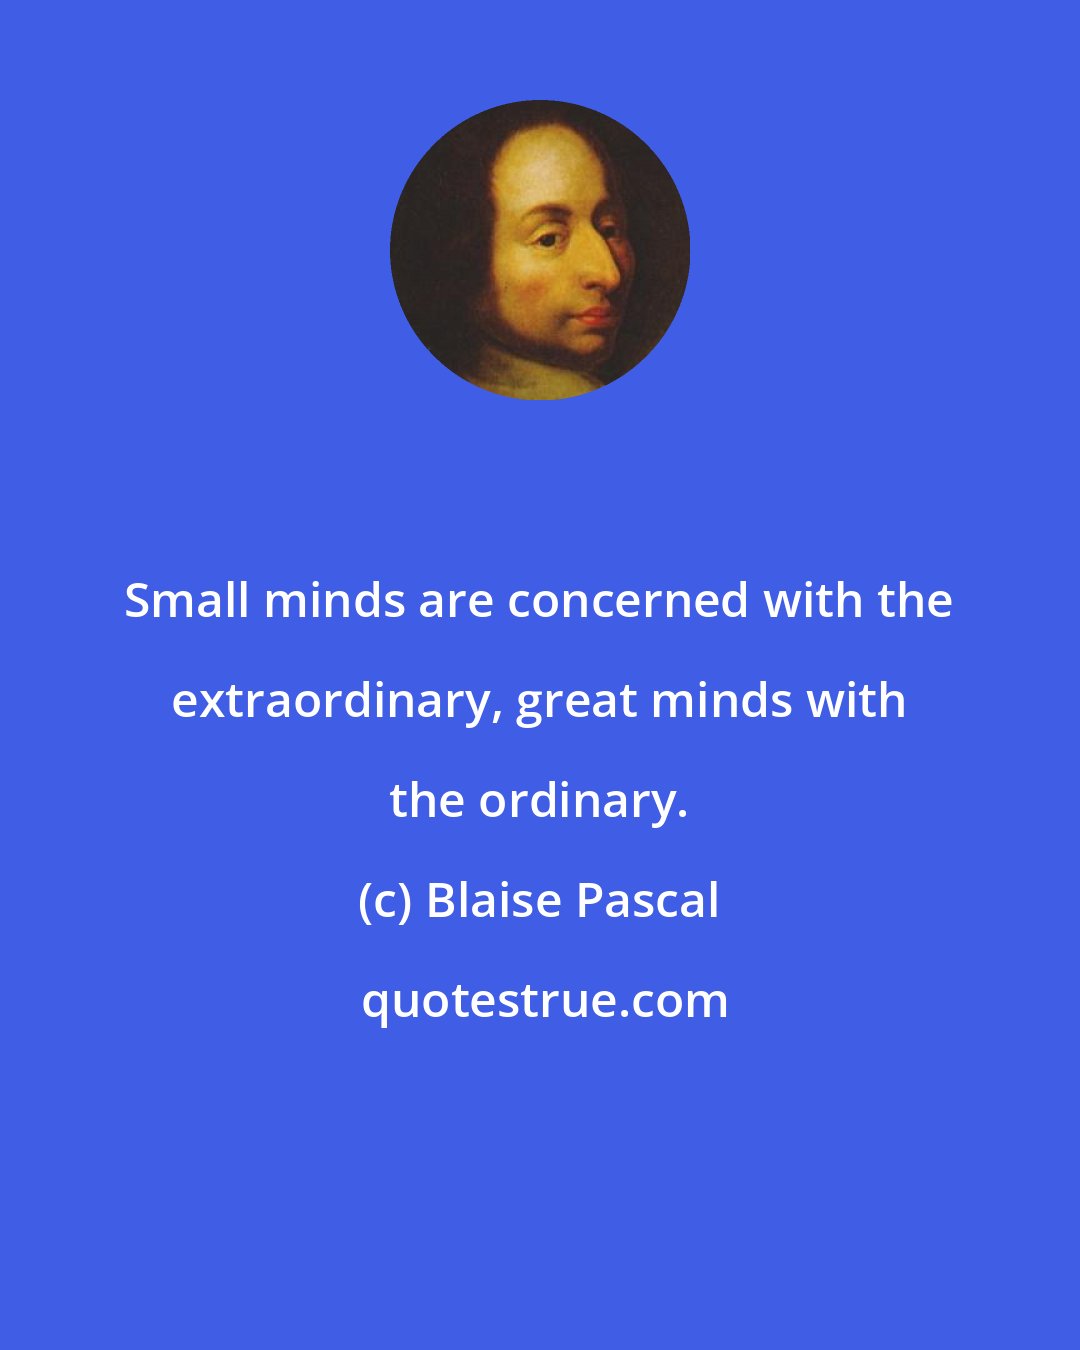 Blaise Pascal: Small minds are concerned with the extraordinary, great minds with the ordinary.